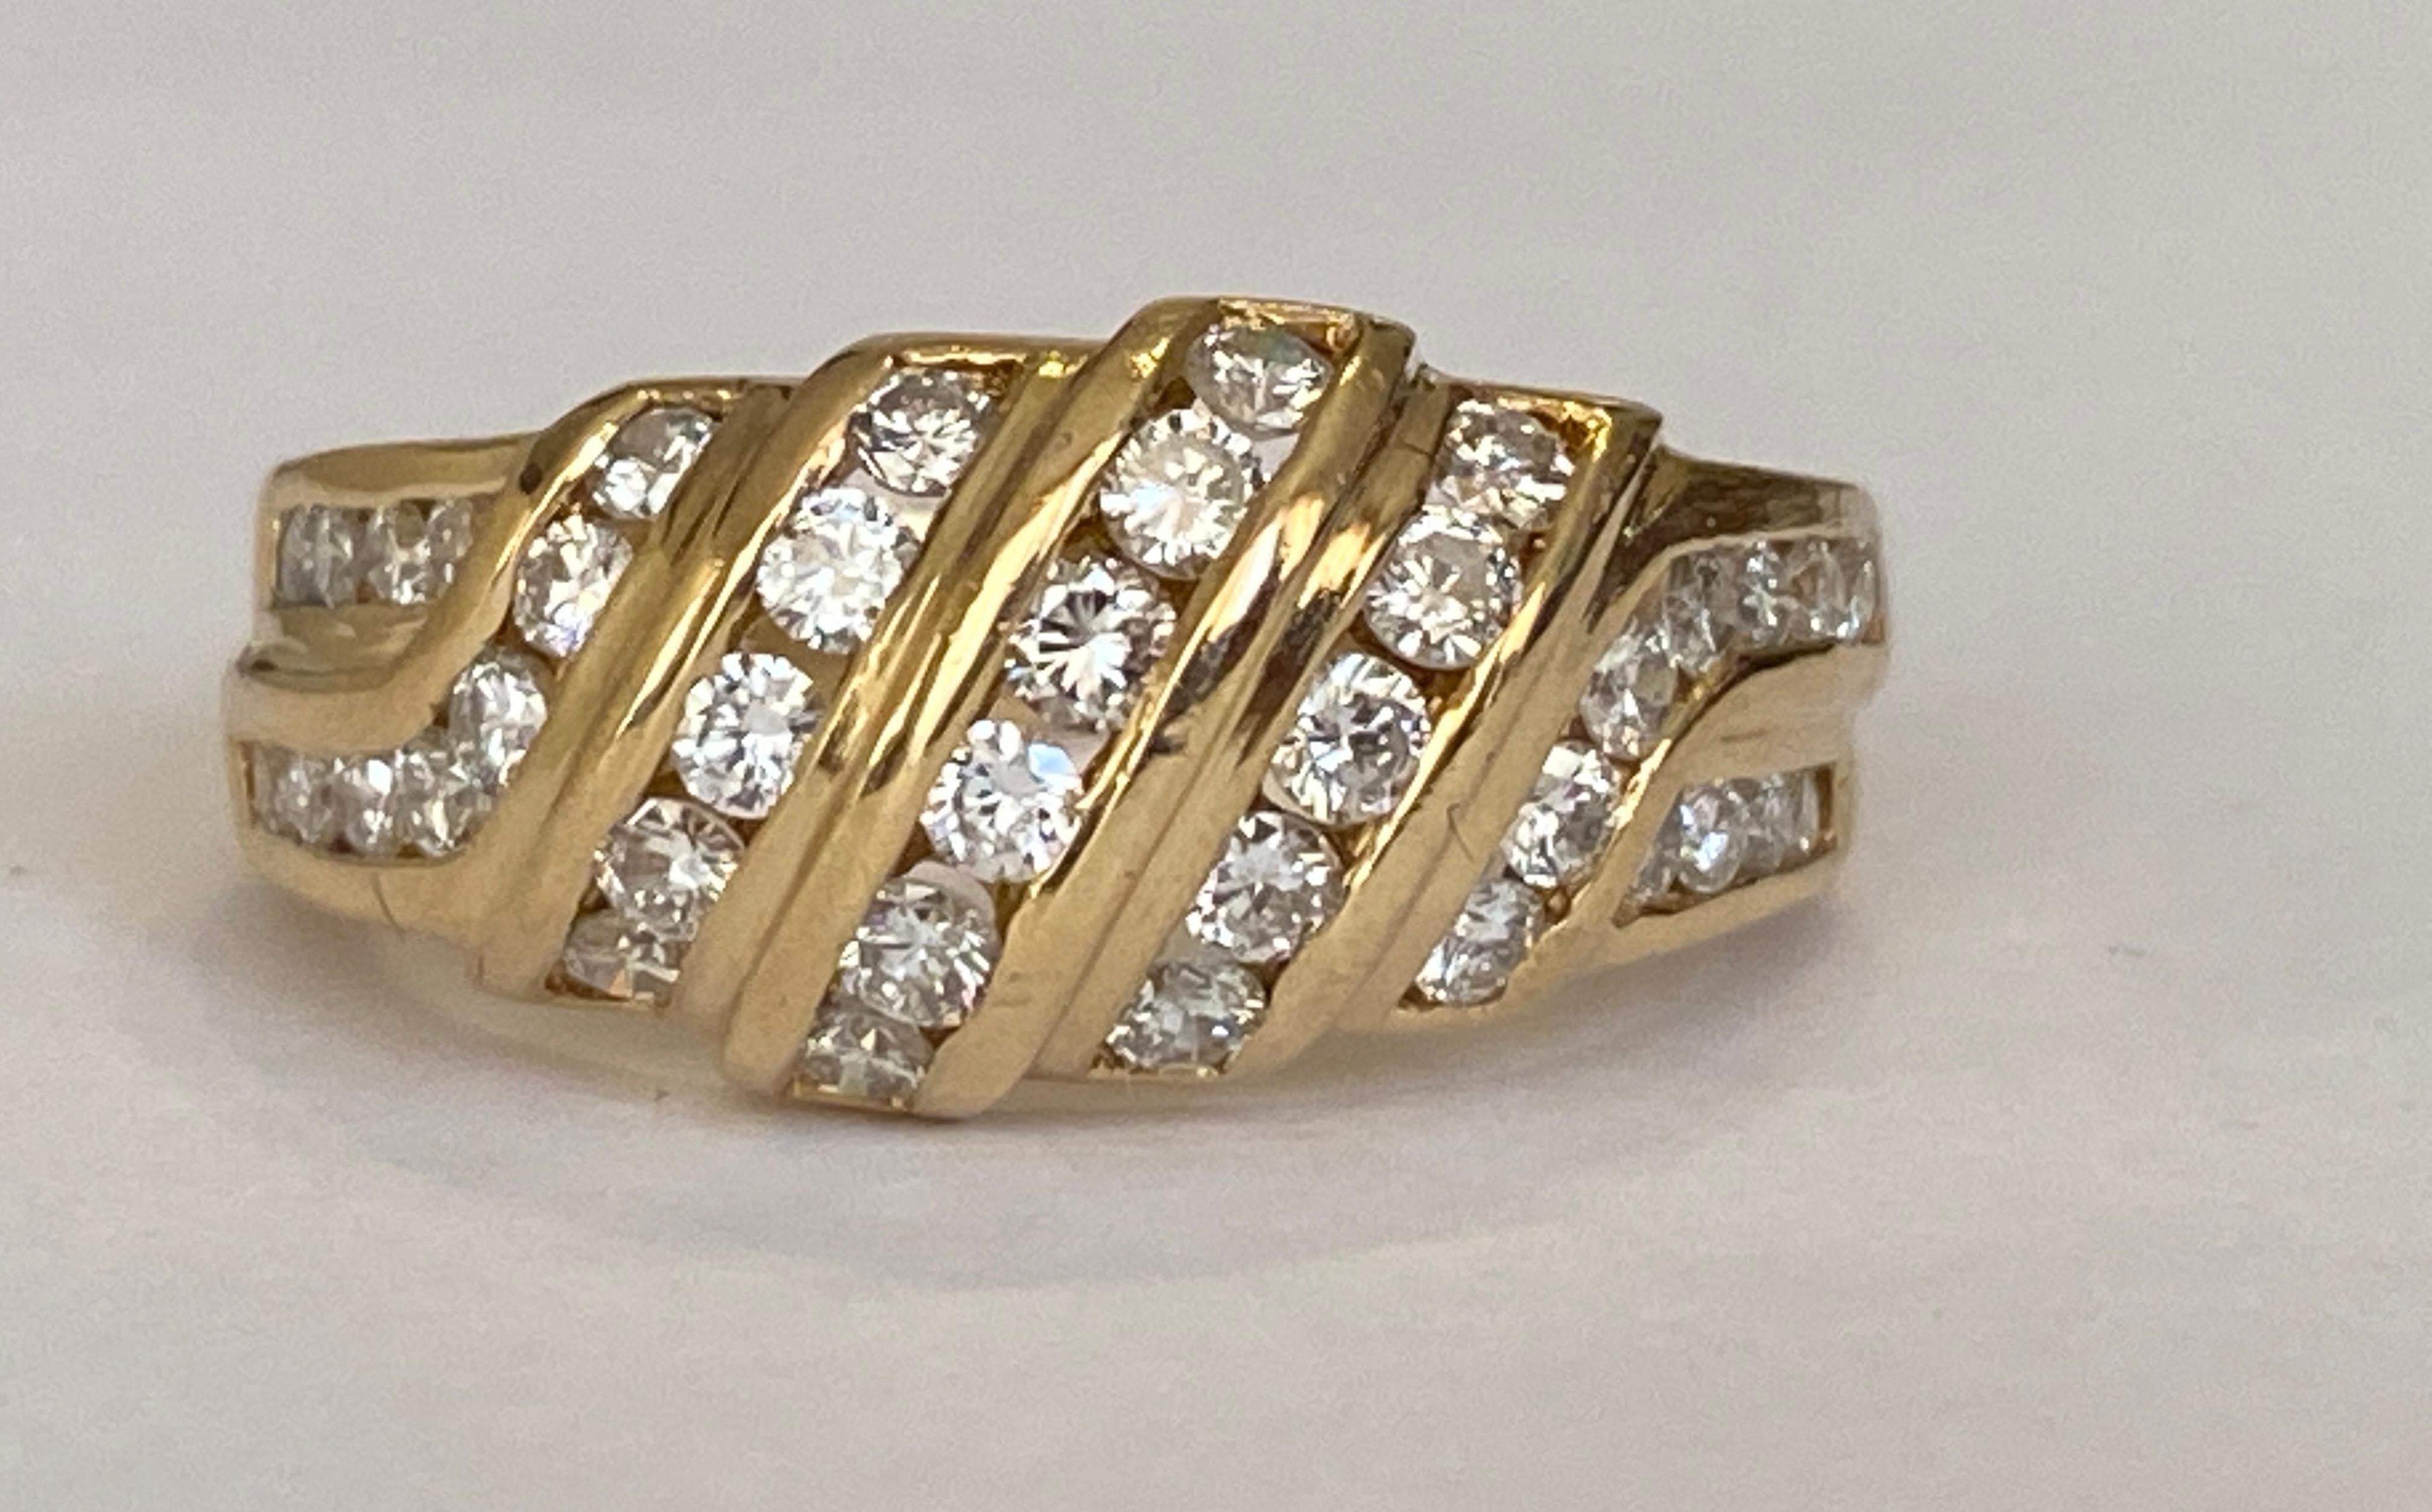 Offered Beautiful vintage ring in 18k yellow gold and diamonds made in Paris France by the Chaumet jewelry house. The ring is set with 38 round brilliant cut diamonds, approximately 0.90 carat of F/VS quality. The ring is stamped CHAUMET PARIS